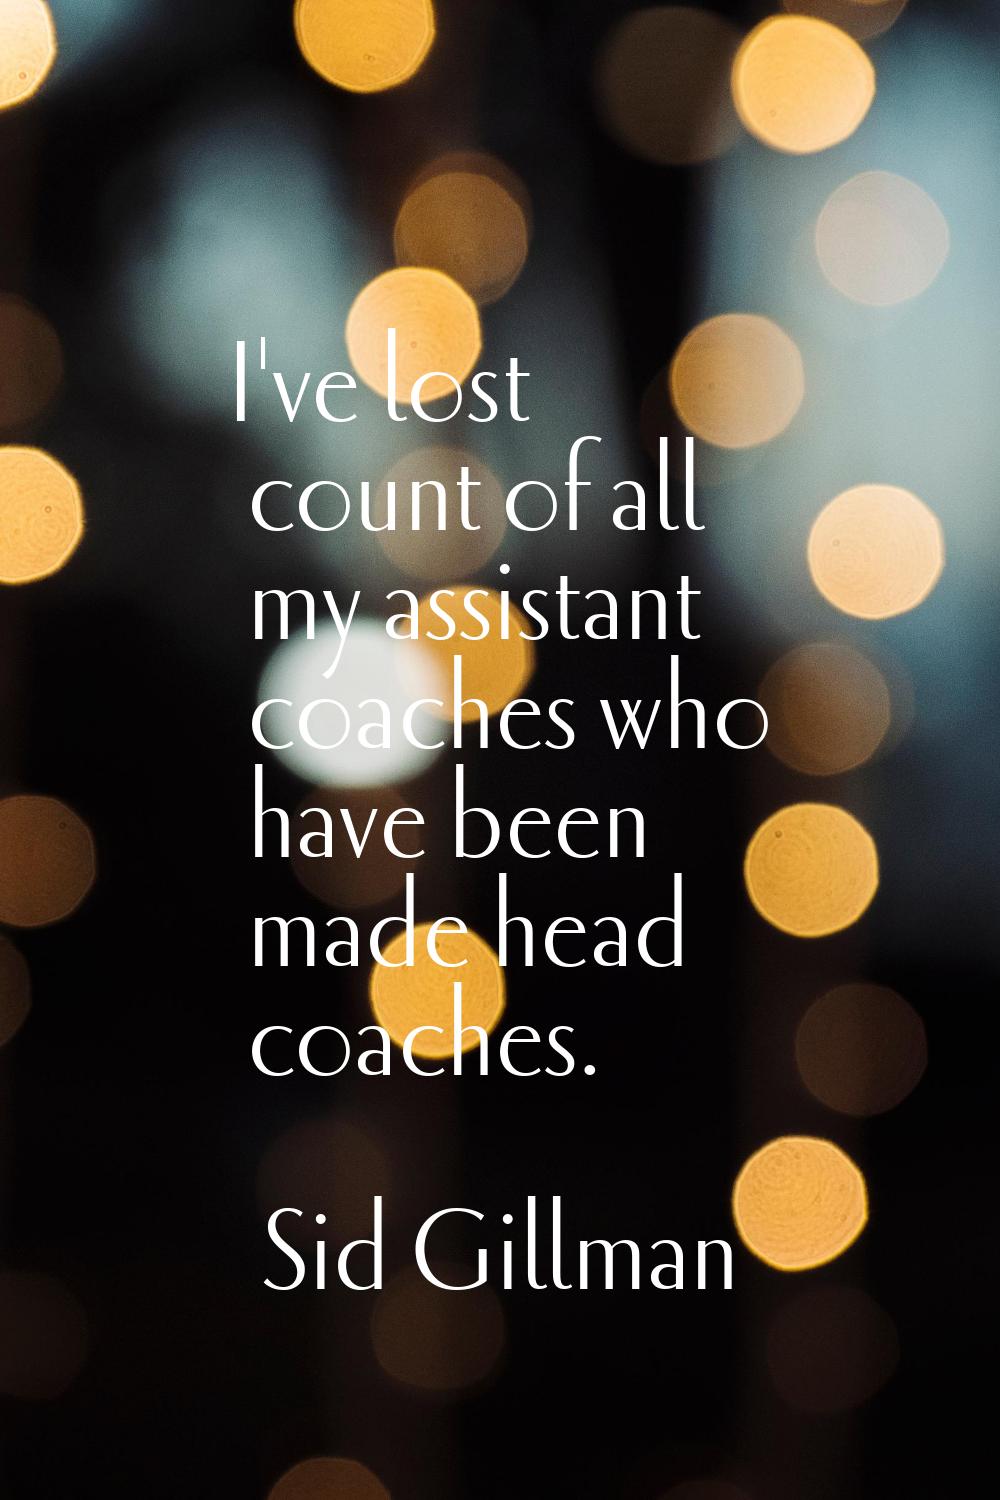 I've lost count of all my assistant coaches who have been made head coaches.